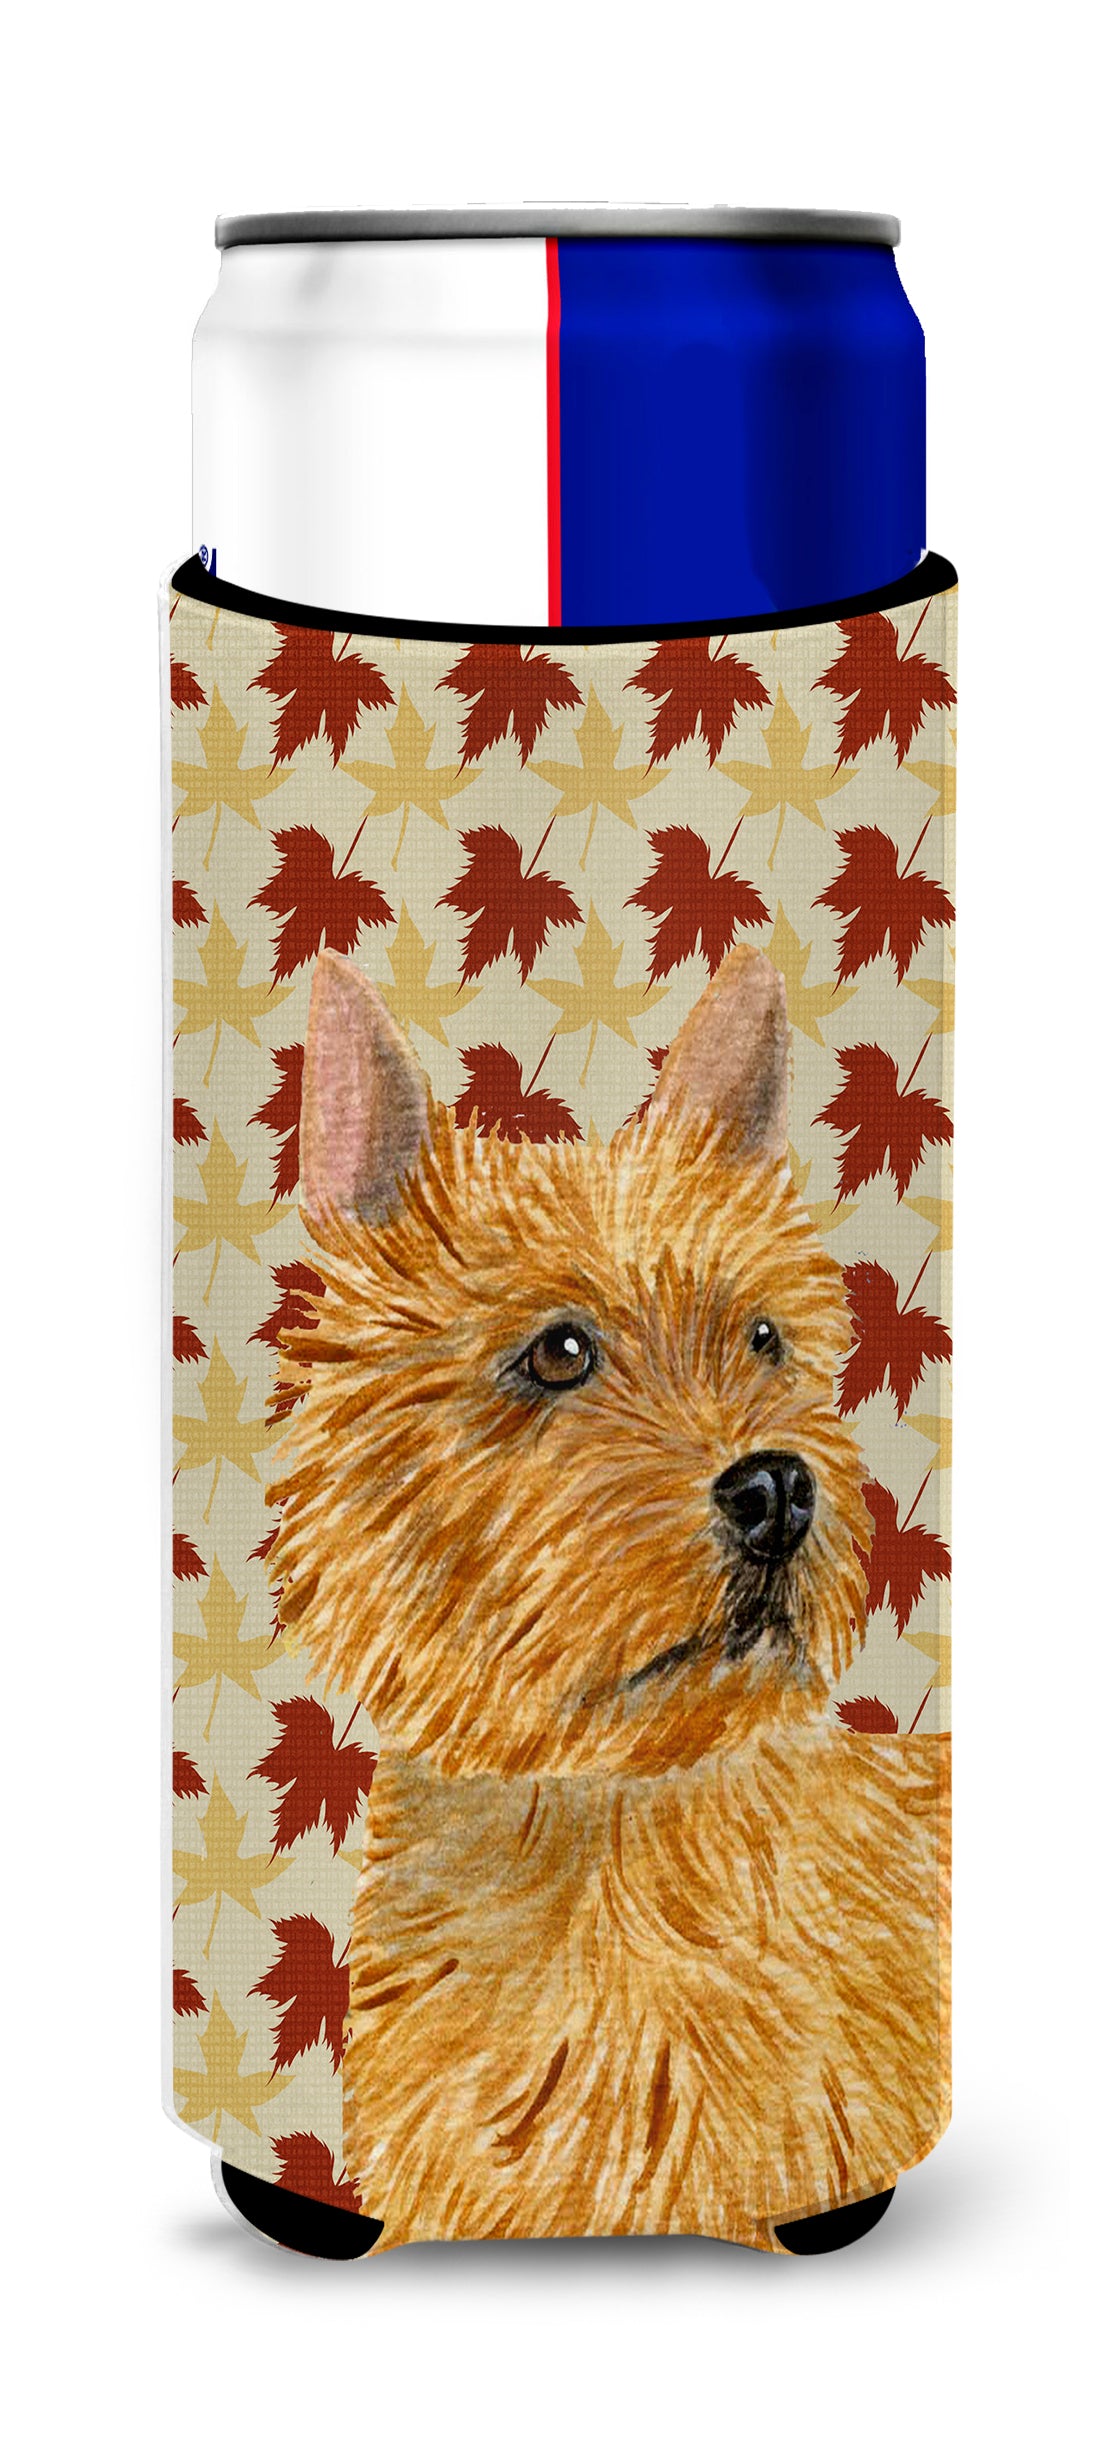 Norwich Terrier Fall Leaves Portrait Ultra Beverage Insulators for slim cans SS4357MUK.